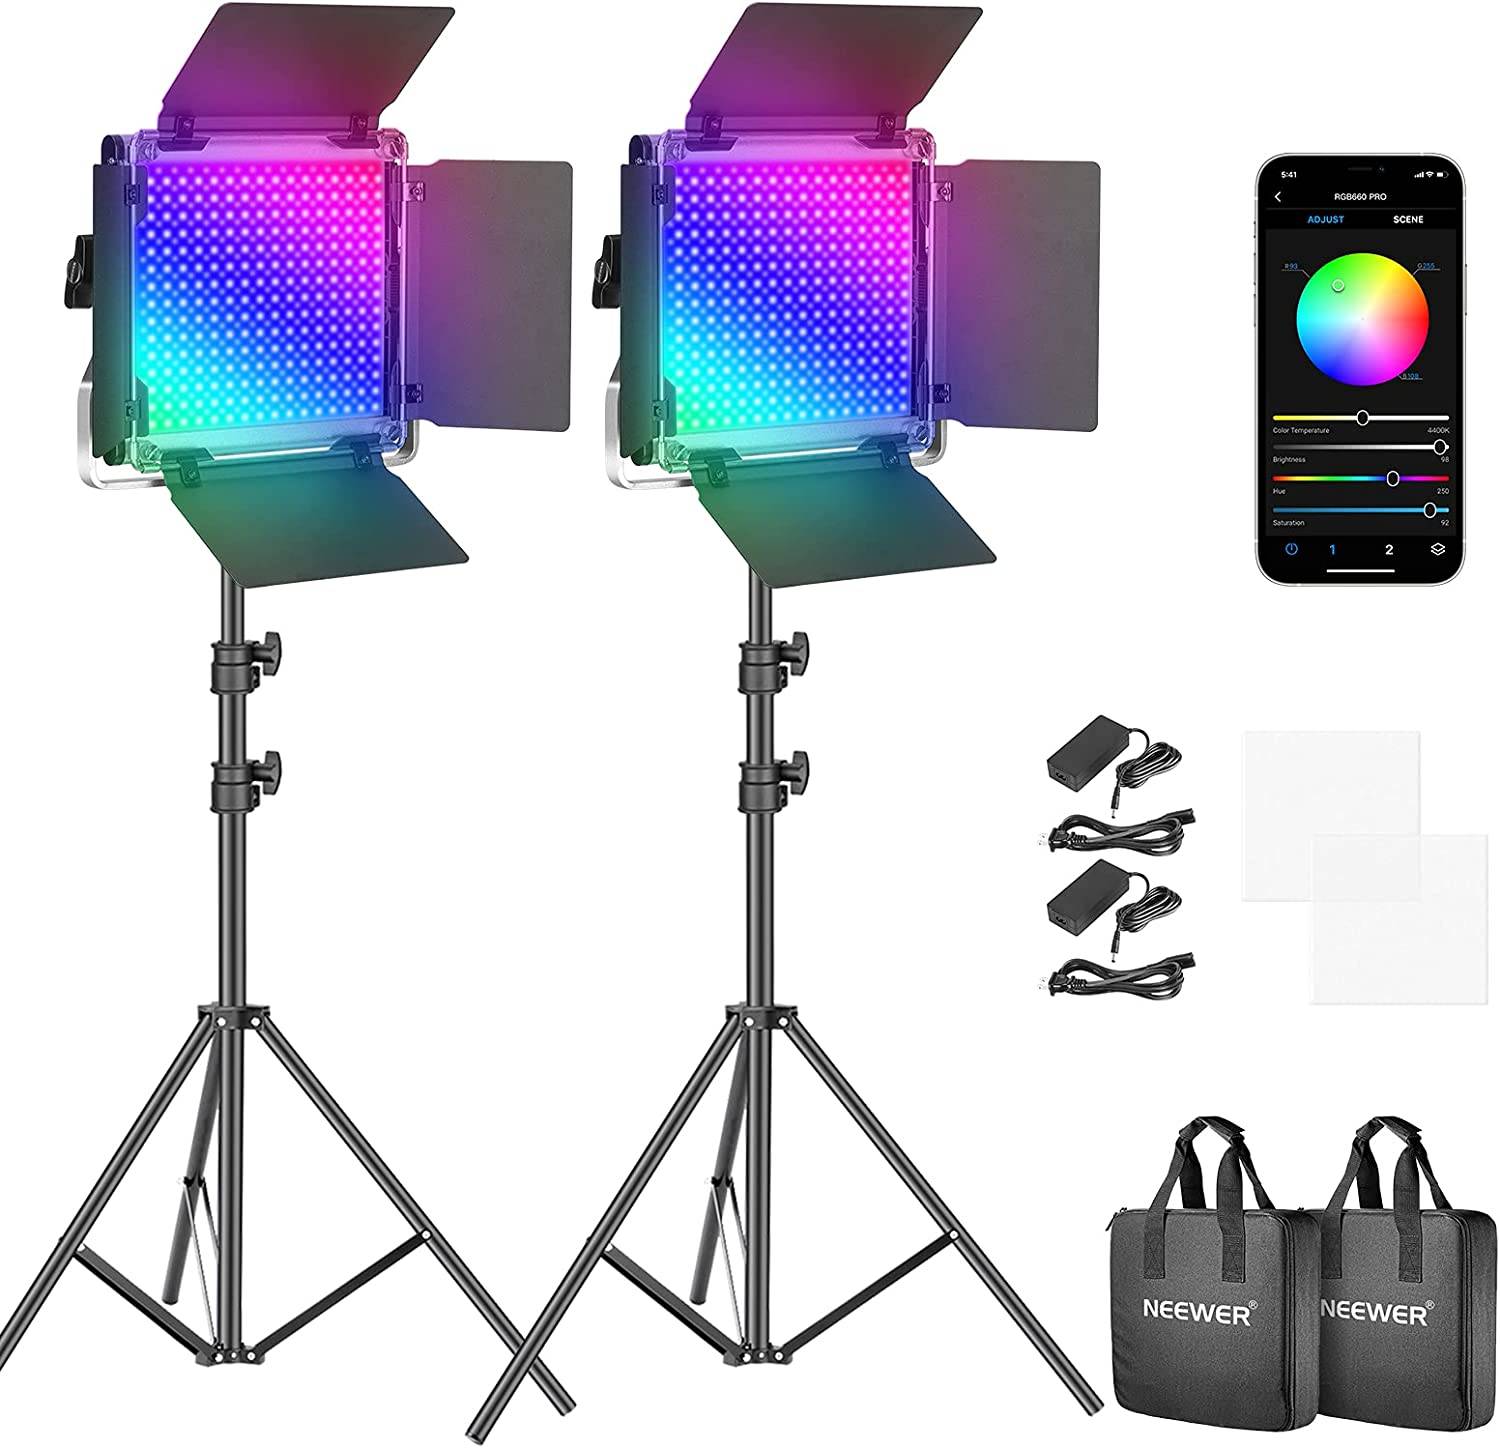 Neewer 2 Packs 660 PRO RGB LED Video Light with App Control